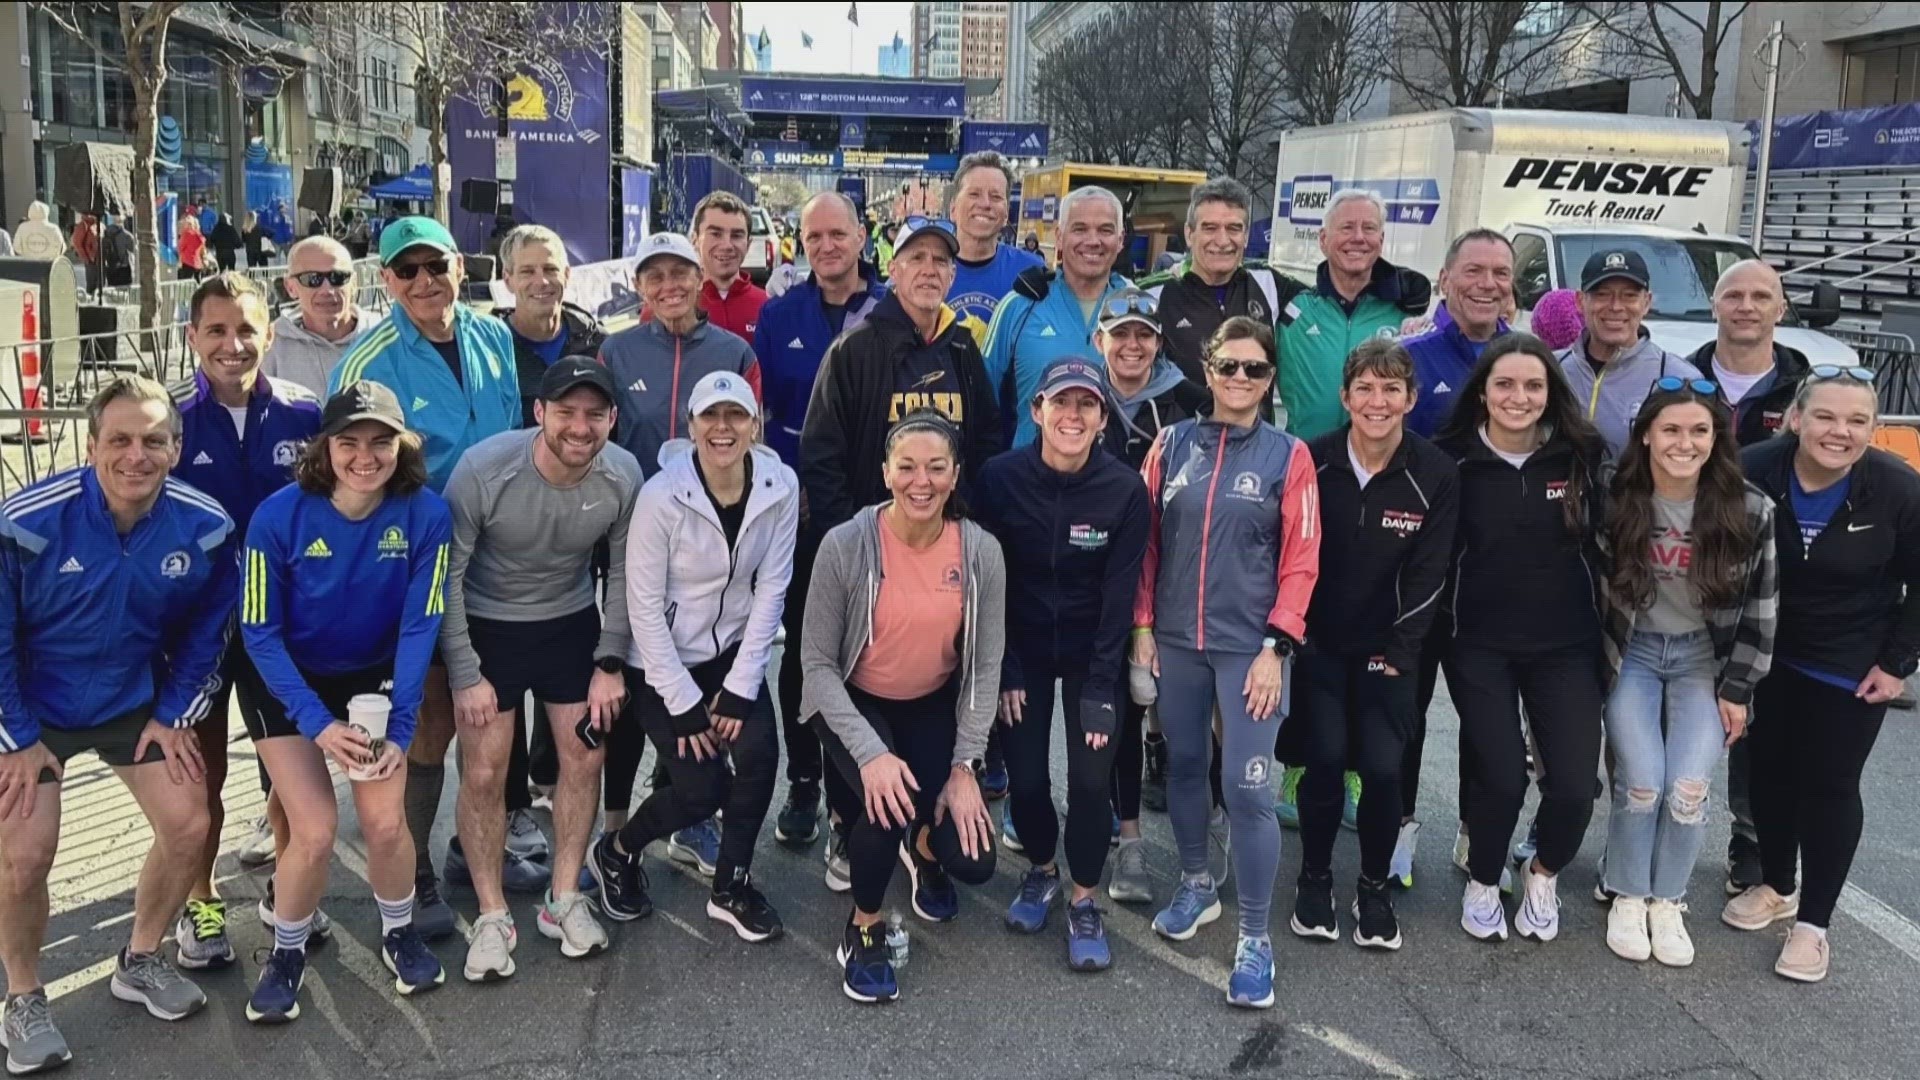 More than 55 runners from the Toledo-area are competing in the Boston Marathon on April 15.